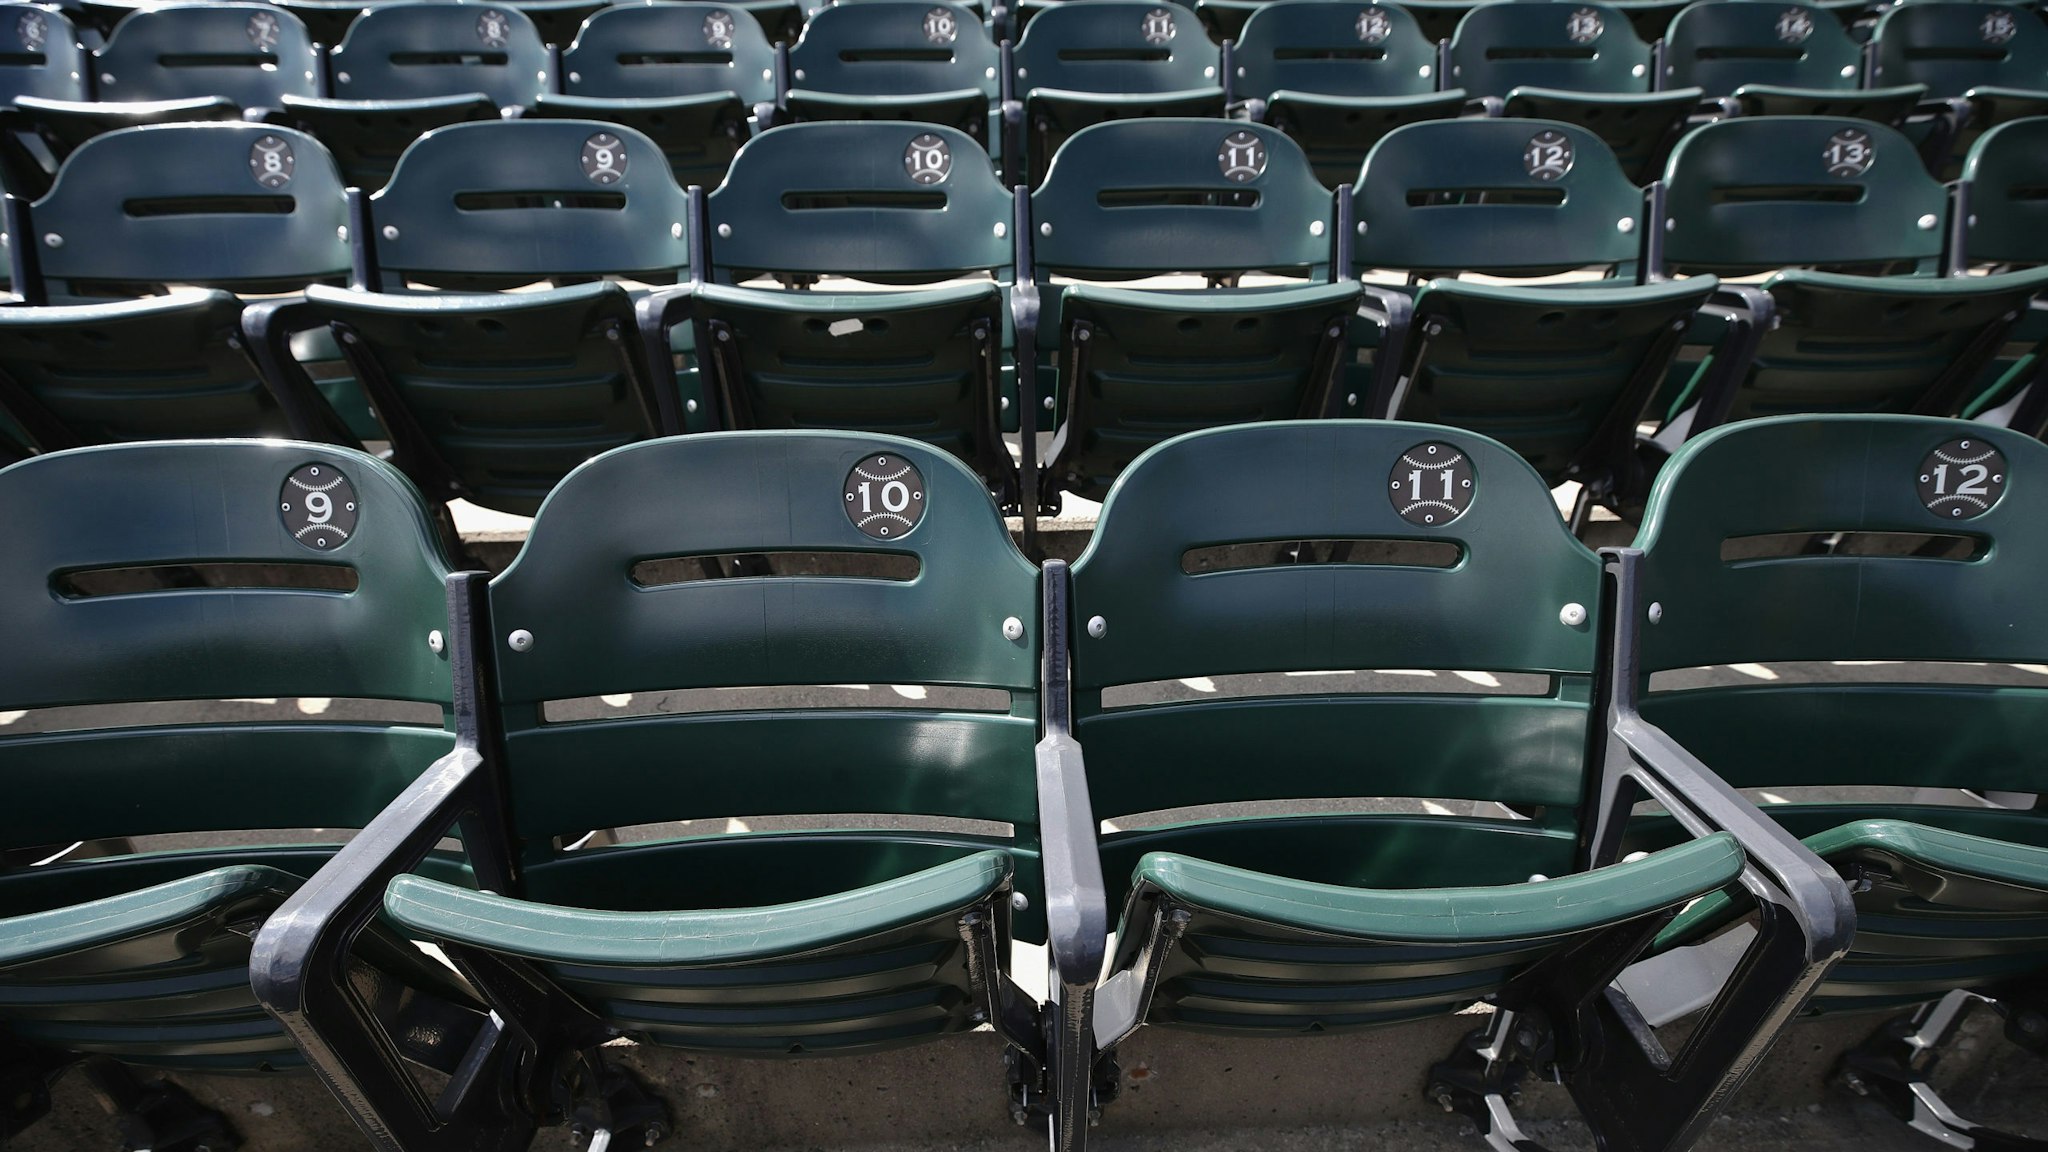 CHICAGO, ILLINOIS - MAY 08: A general view of seats in the outfield at Guaranteed Rate Feld, home of the Chicago White Sox, on May 08, 2020 in Chicago, Illinois. The 2020 Major League Baseball season is on hold due to the COVID-19 pandemic. (Photo by Jonathan Daniel/Getty Images)